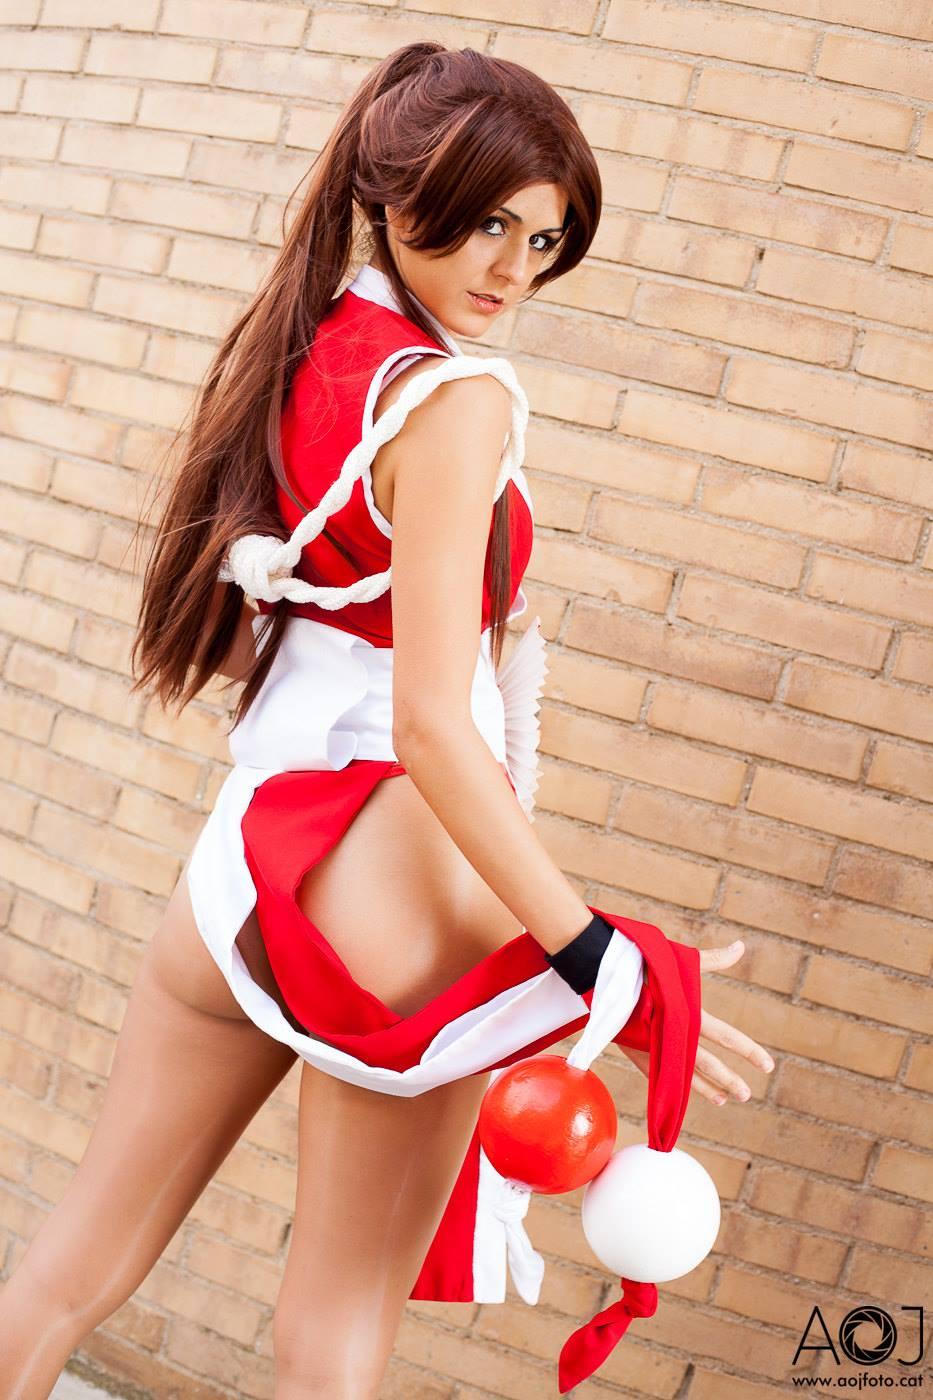 50+ Hot Pictures Of Mai Shiranui From Fatal Fury And The King Of Fighters Series 54